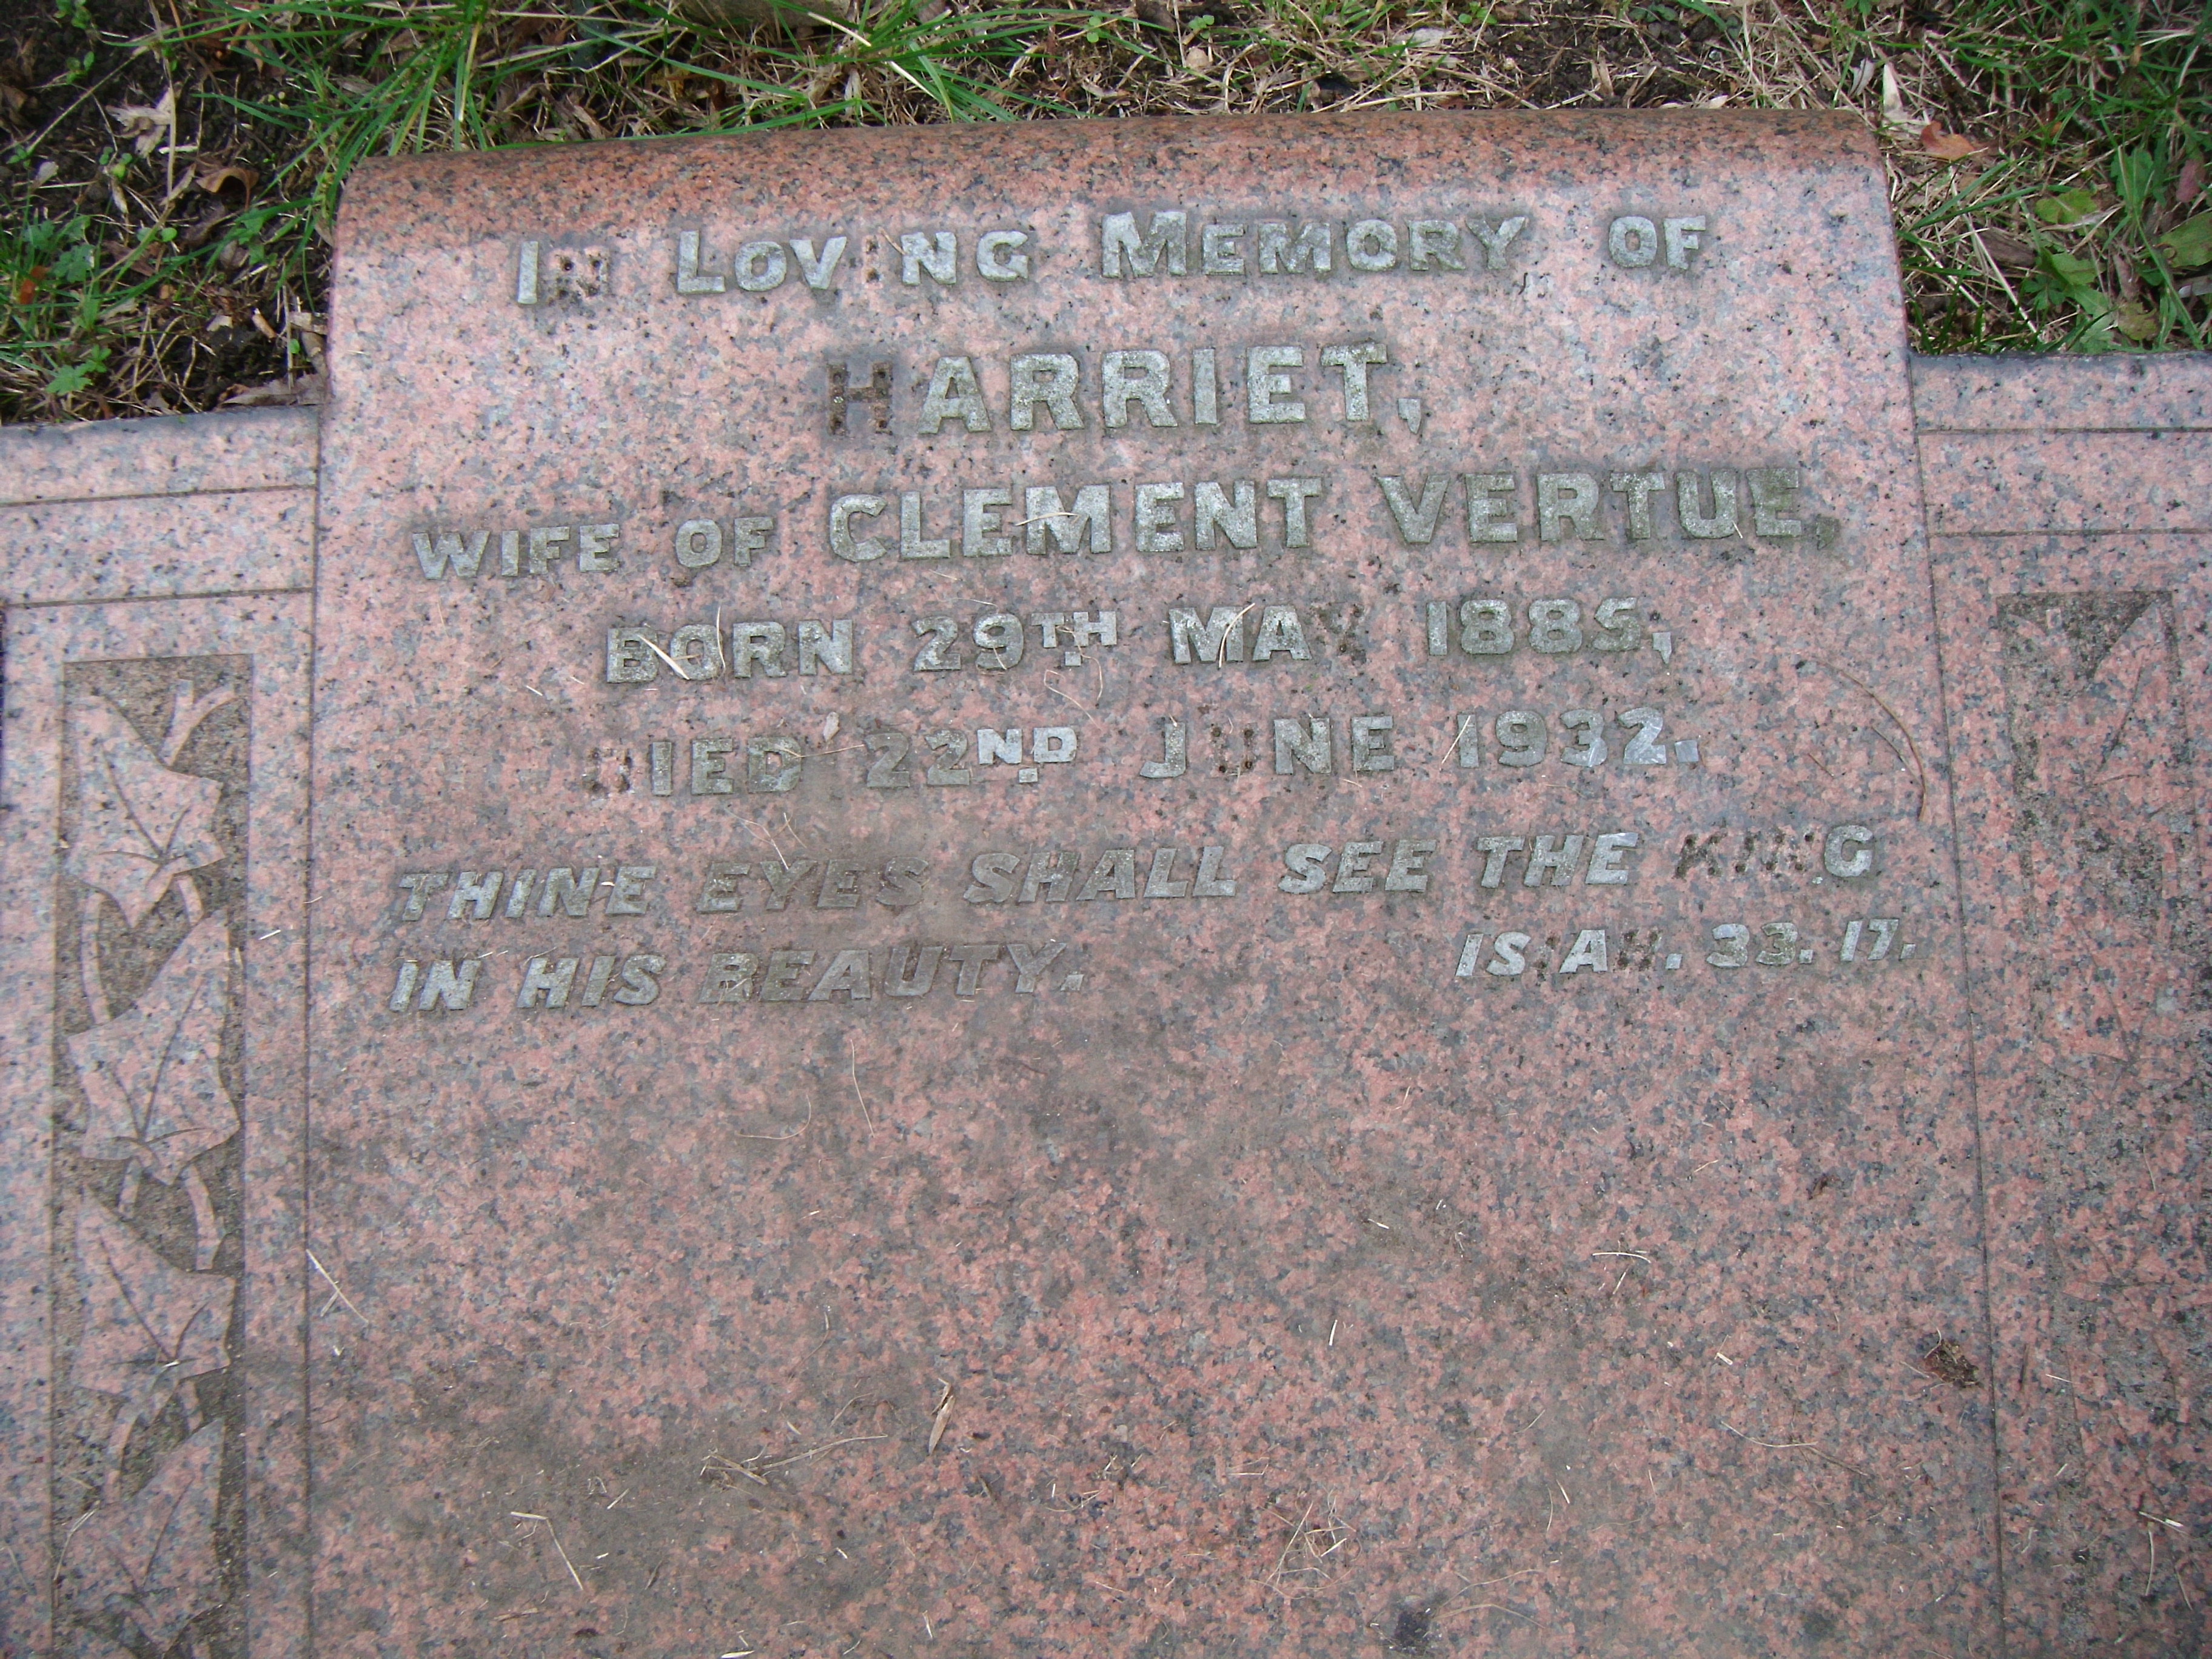 The grave of Harriet Vertue, wife of Clement Vertue, who died in 1932 at West Norwood Cemetery